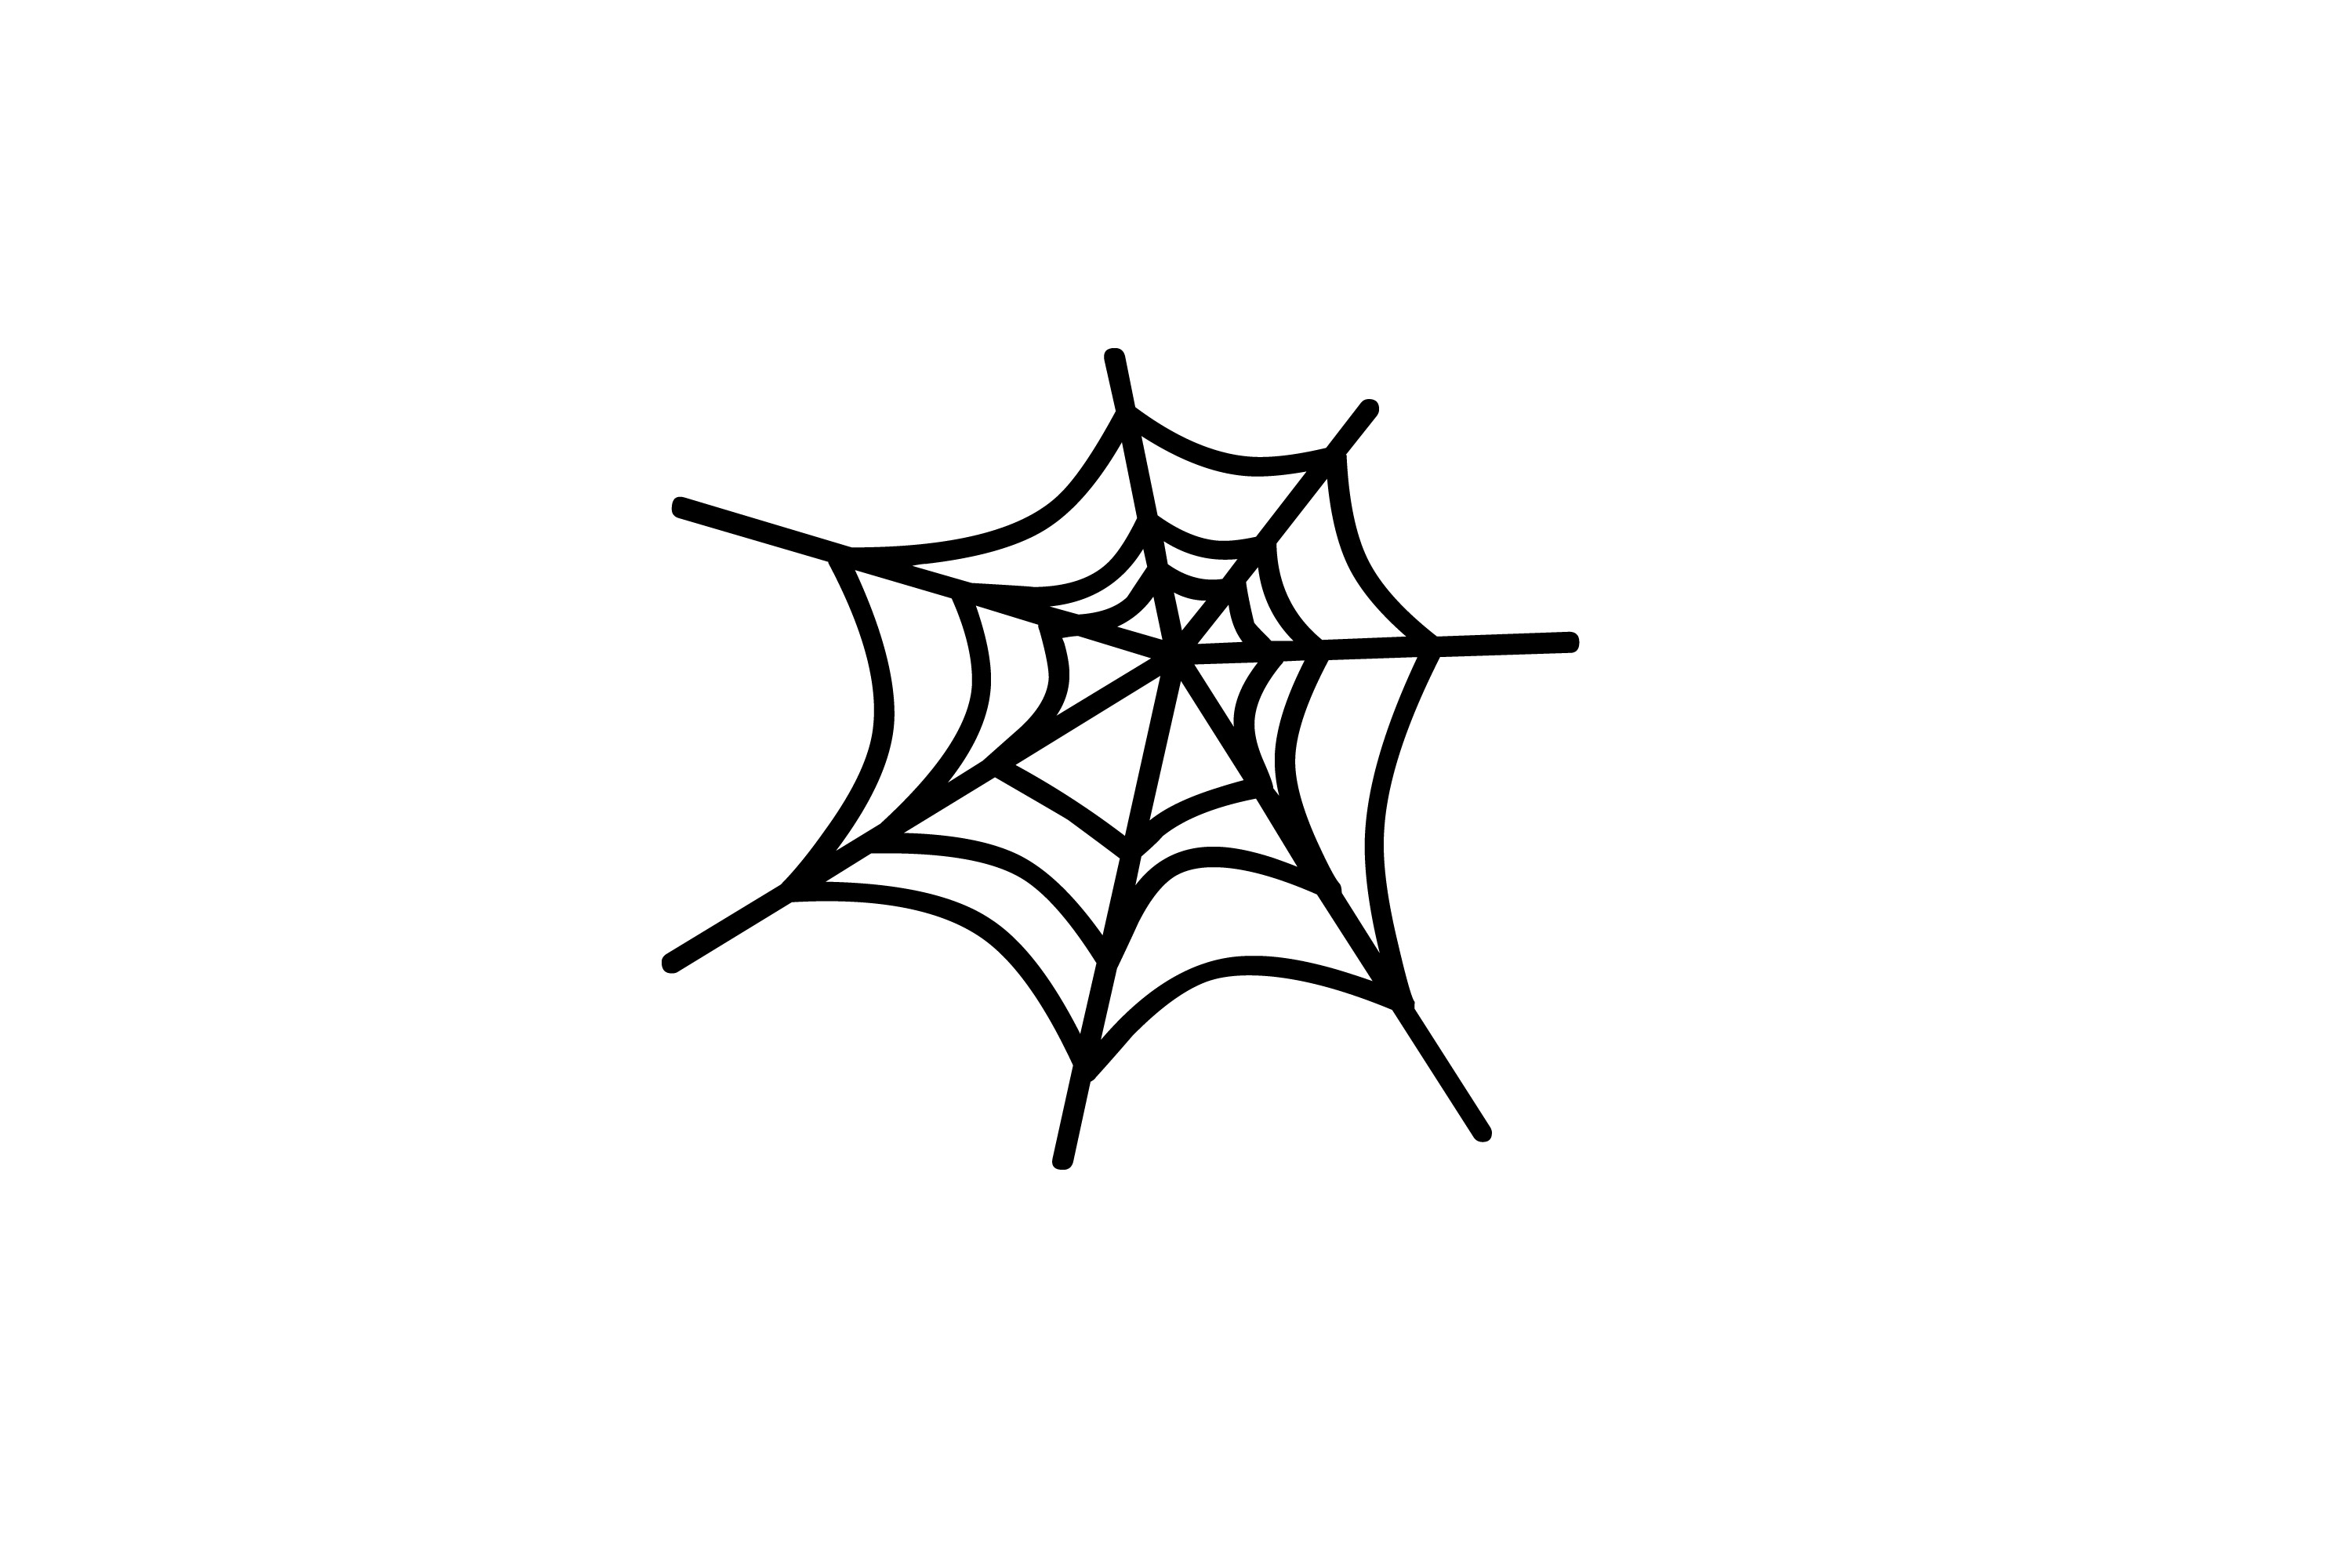 Spider Web Border Clipart | Clipart Panda - Free Clipart Images